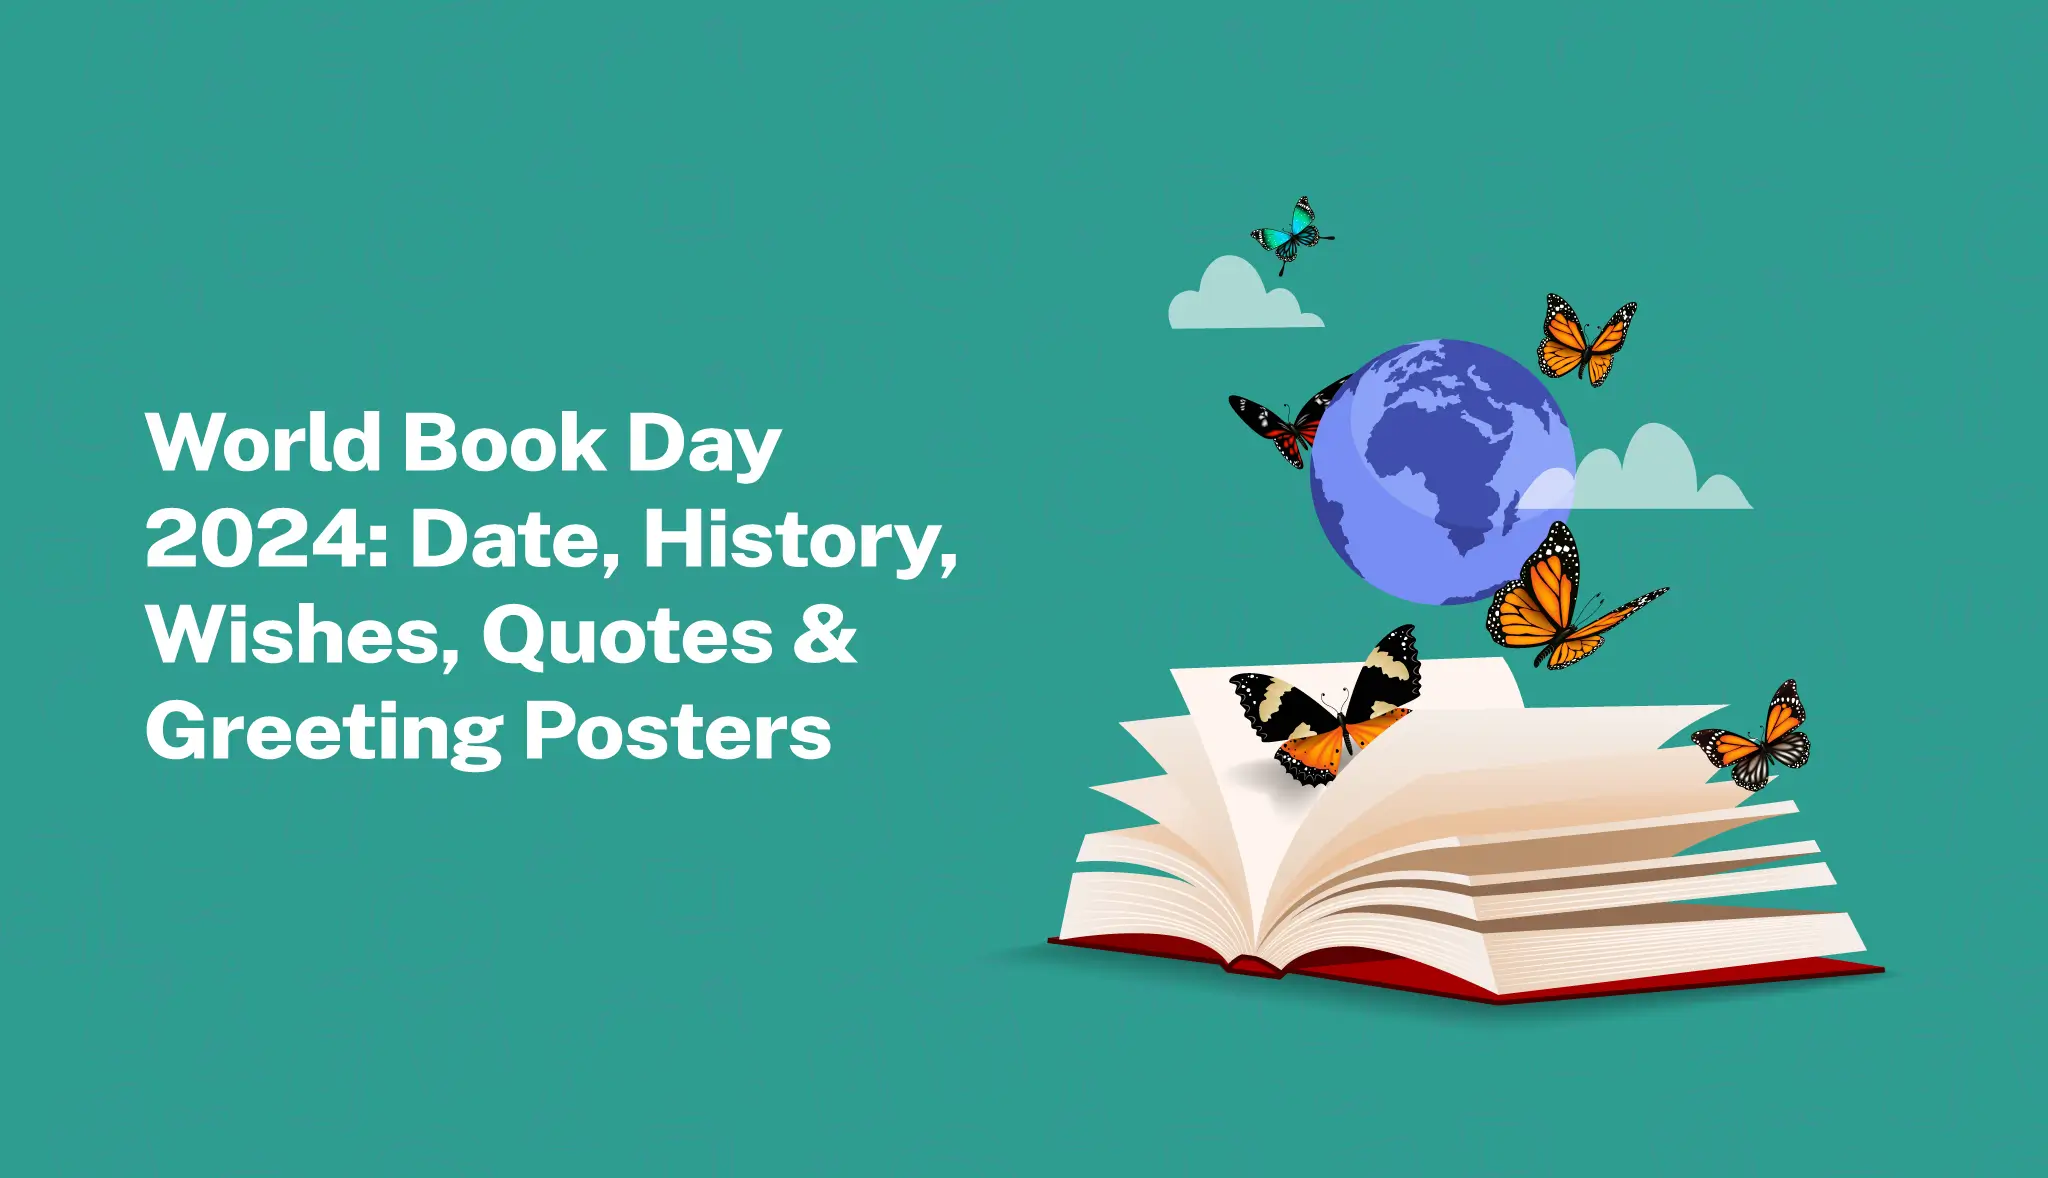 World Book Day 2024: Date, History, Wishes, Quotes & Posters - Postive